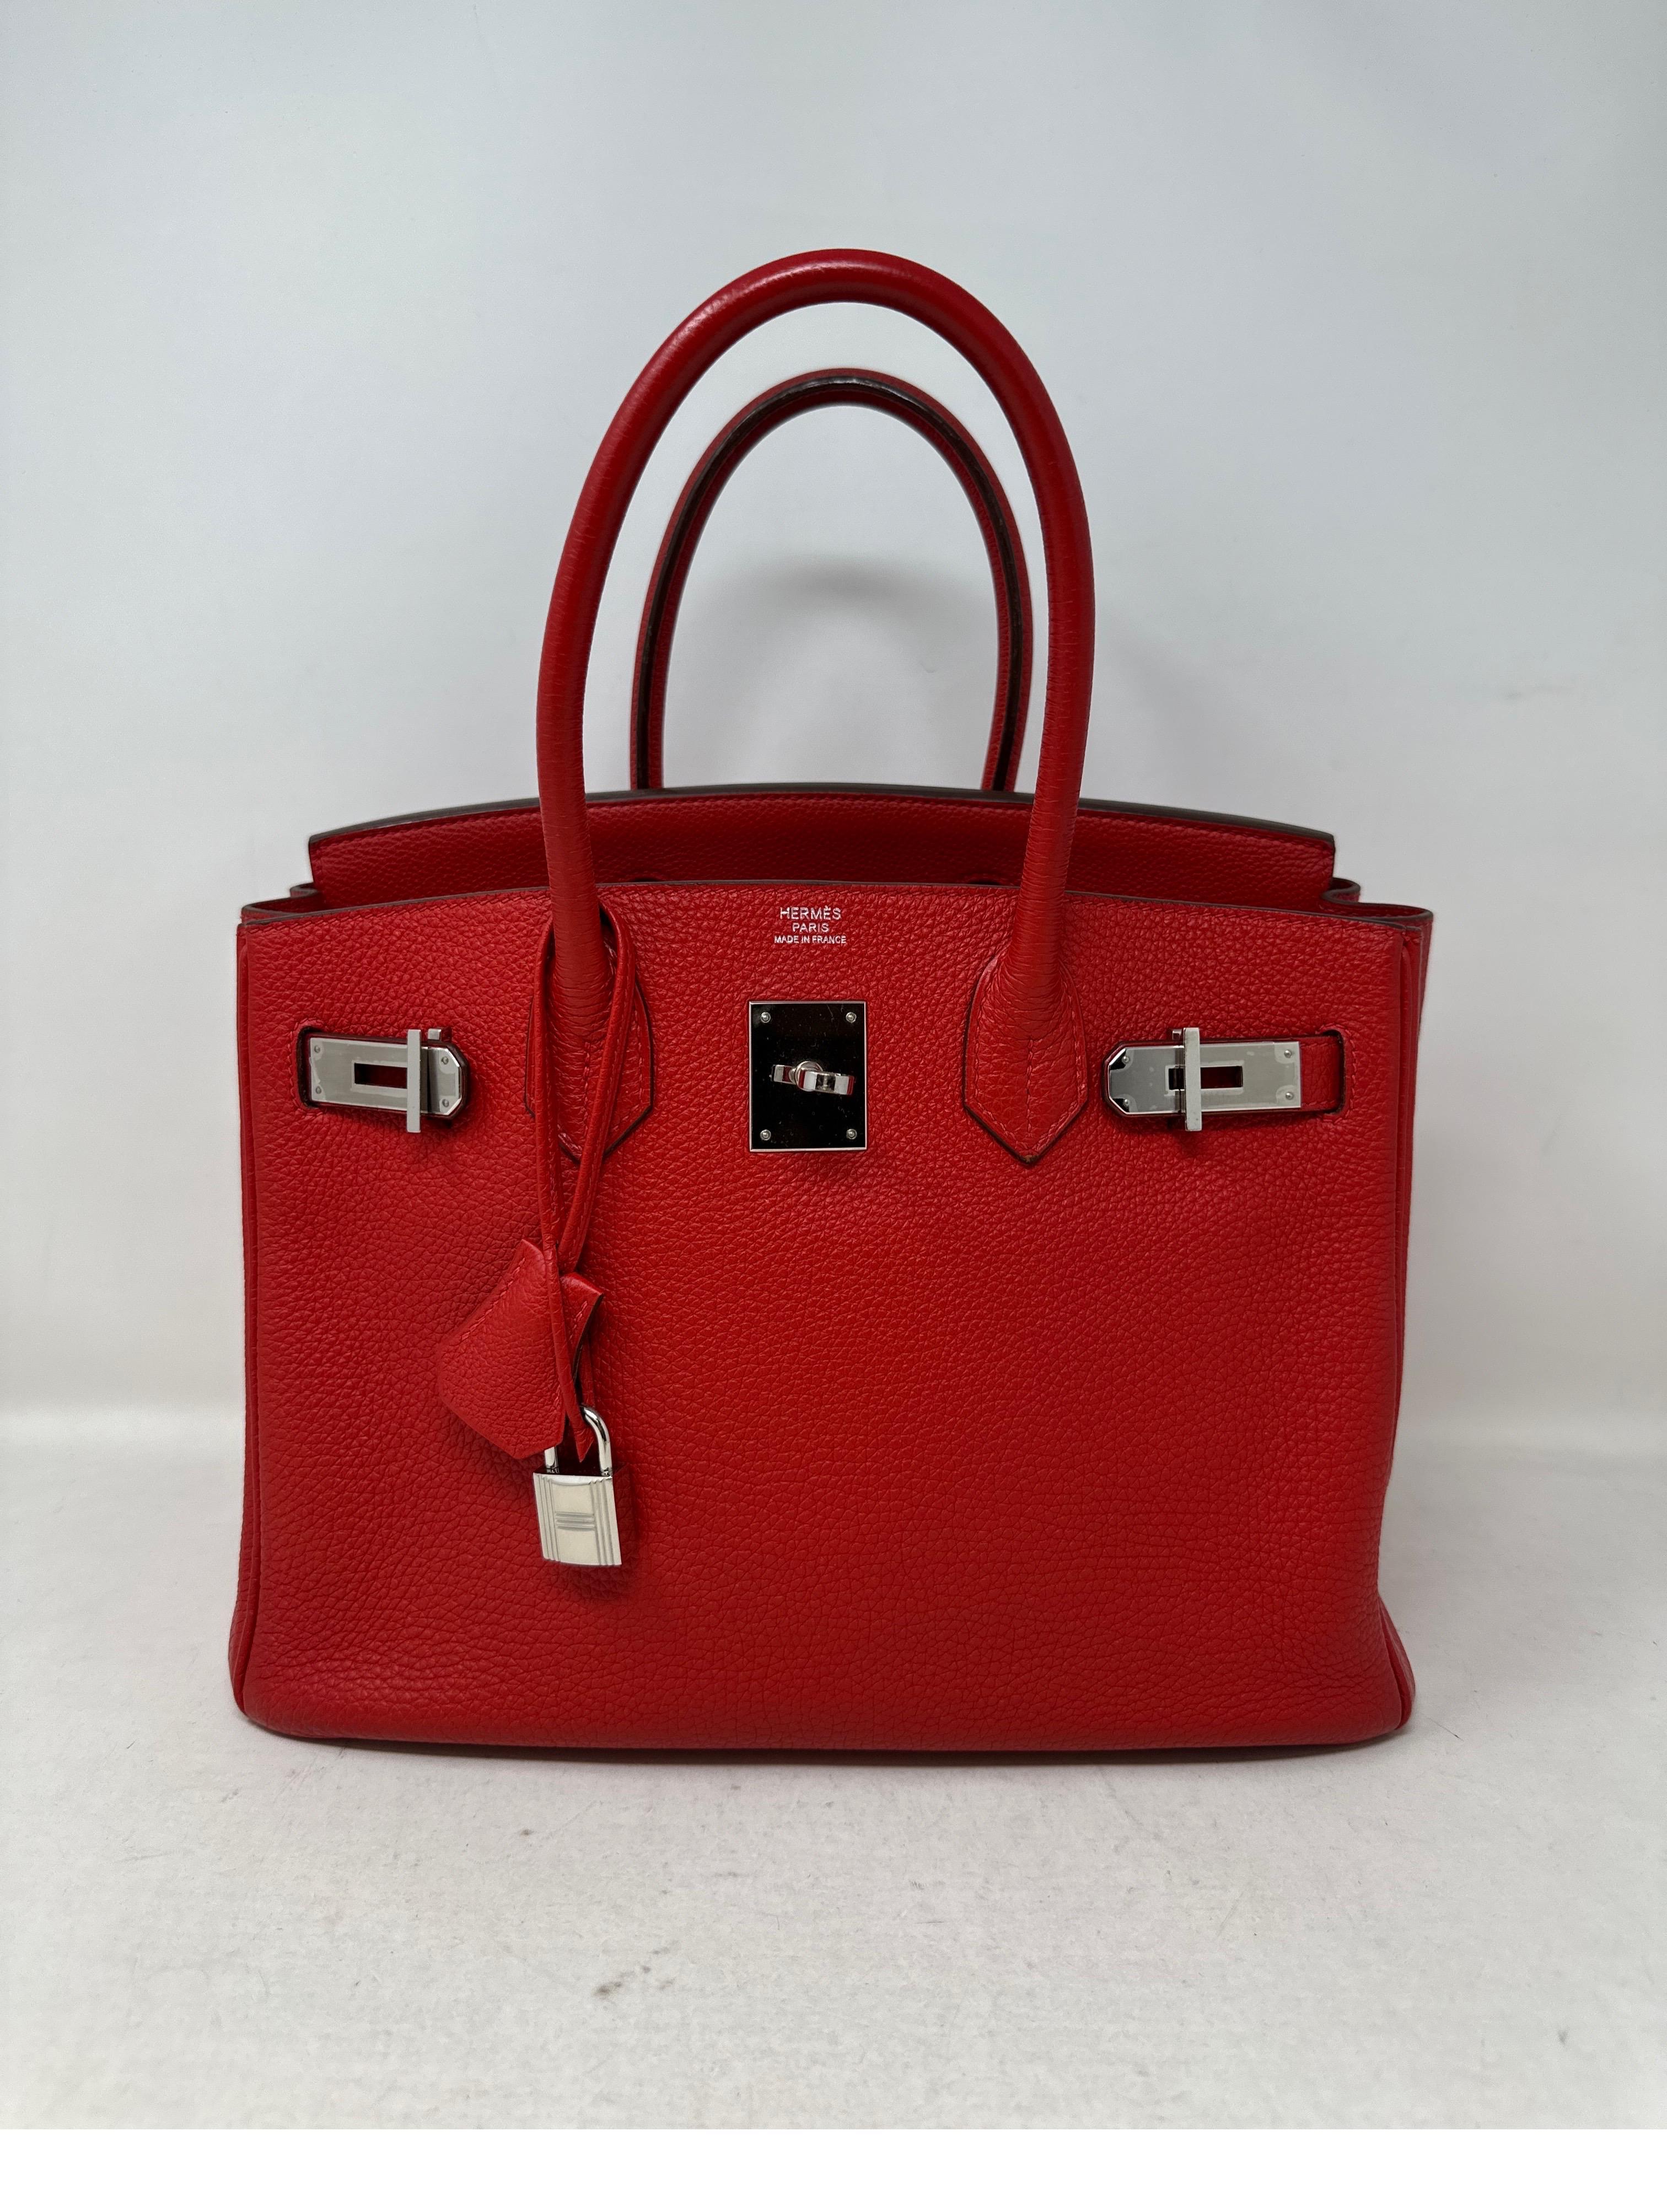 Hermes Rouge Garance Birkin 30 Bag. Excellent condition. Stunning red color togo leather. Palladium hardware. Interior clean. Most wanted size 30. Includes clochette, lock keys, and dust bag. Guaranteed authentic. 